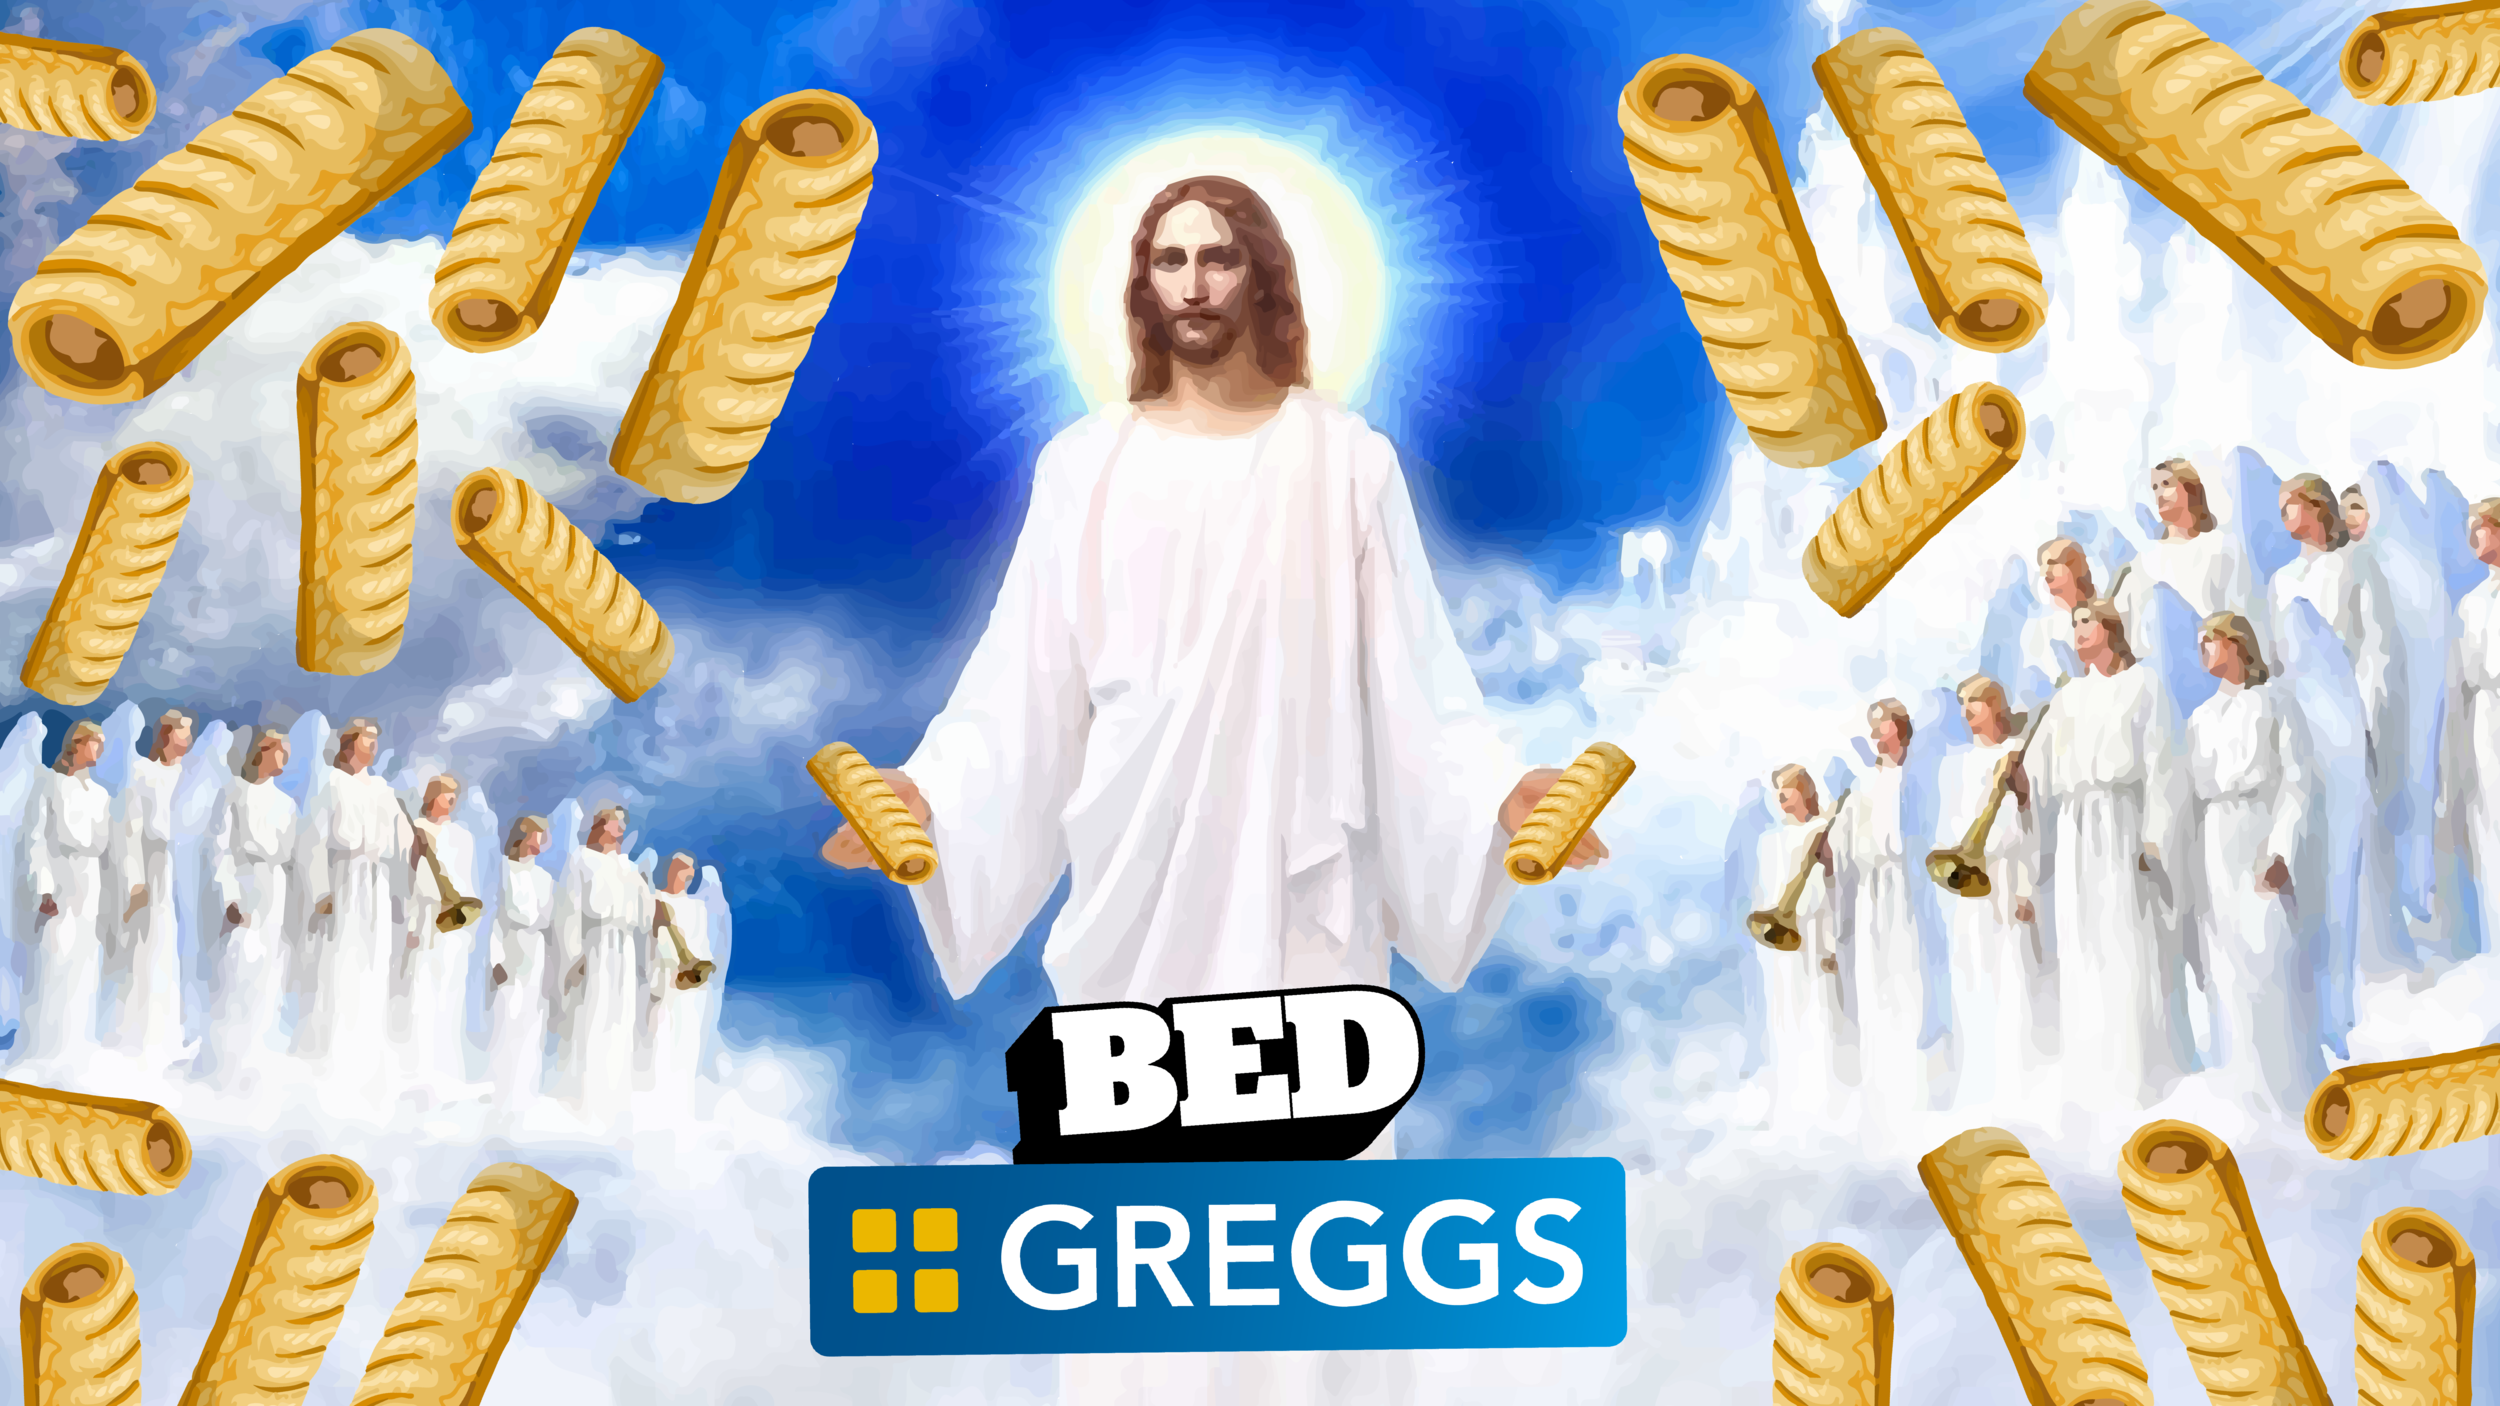 BED+GREGGS+COVER-01